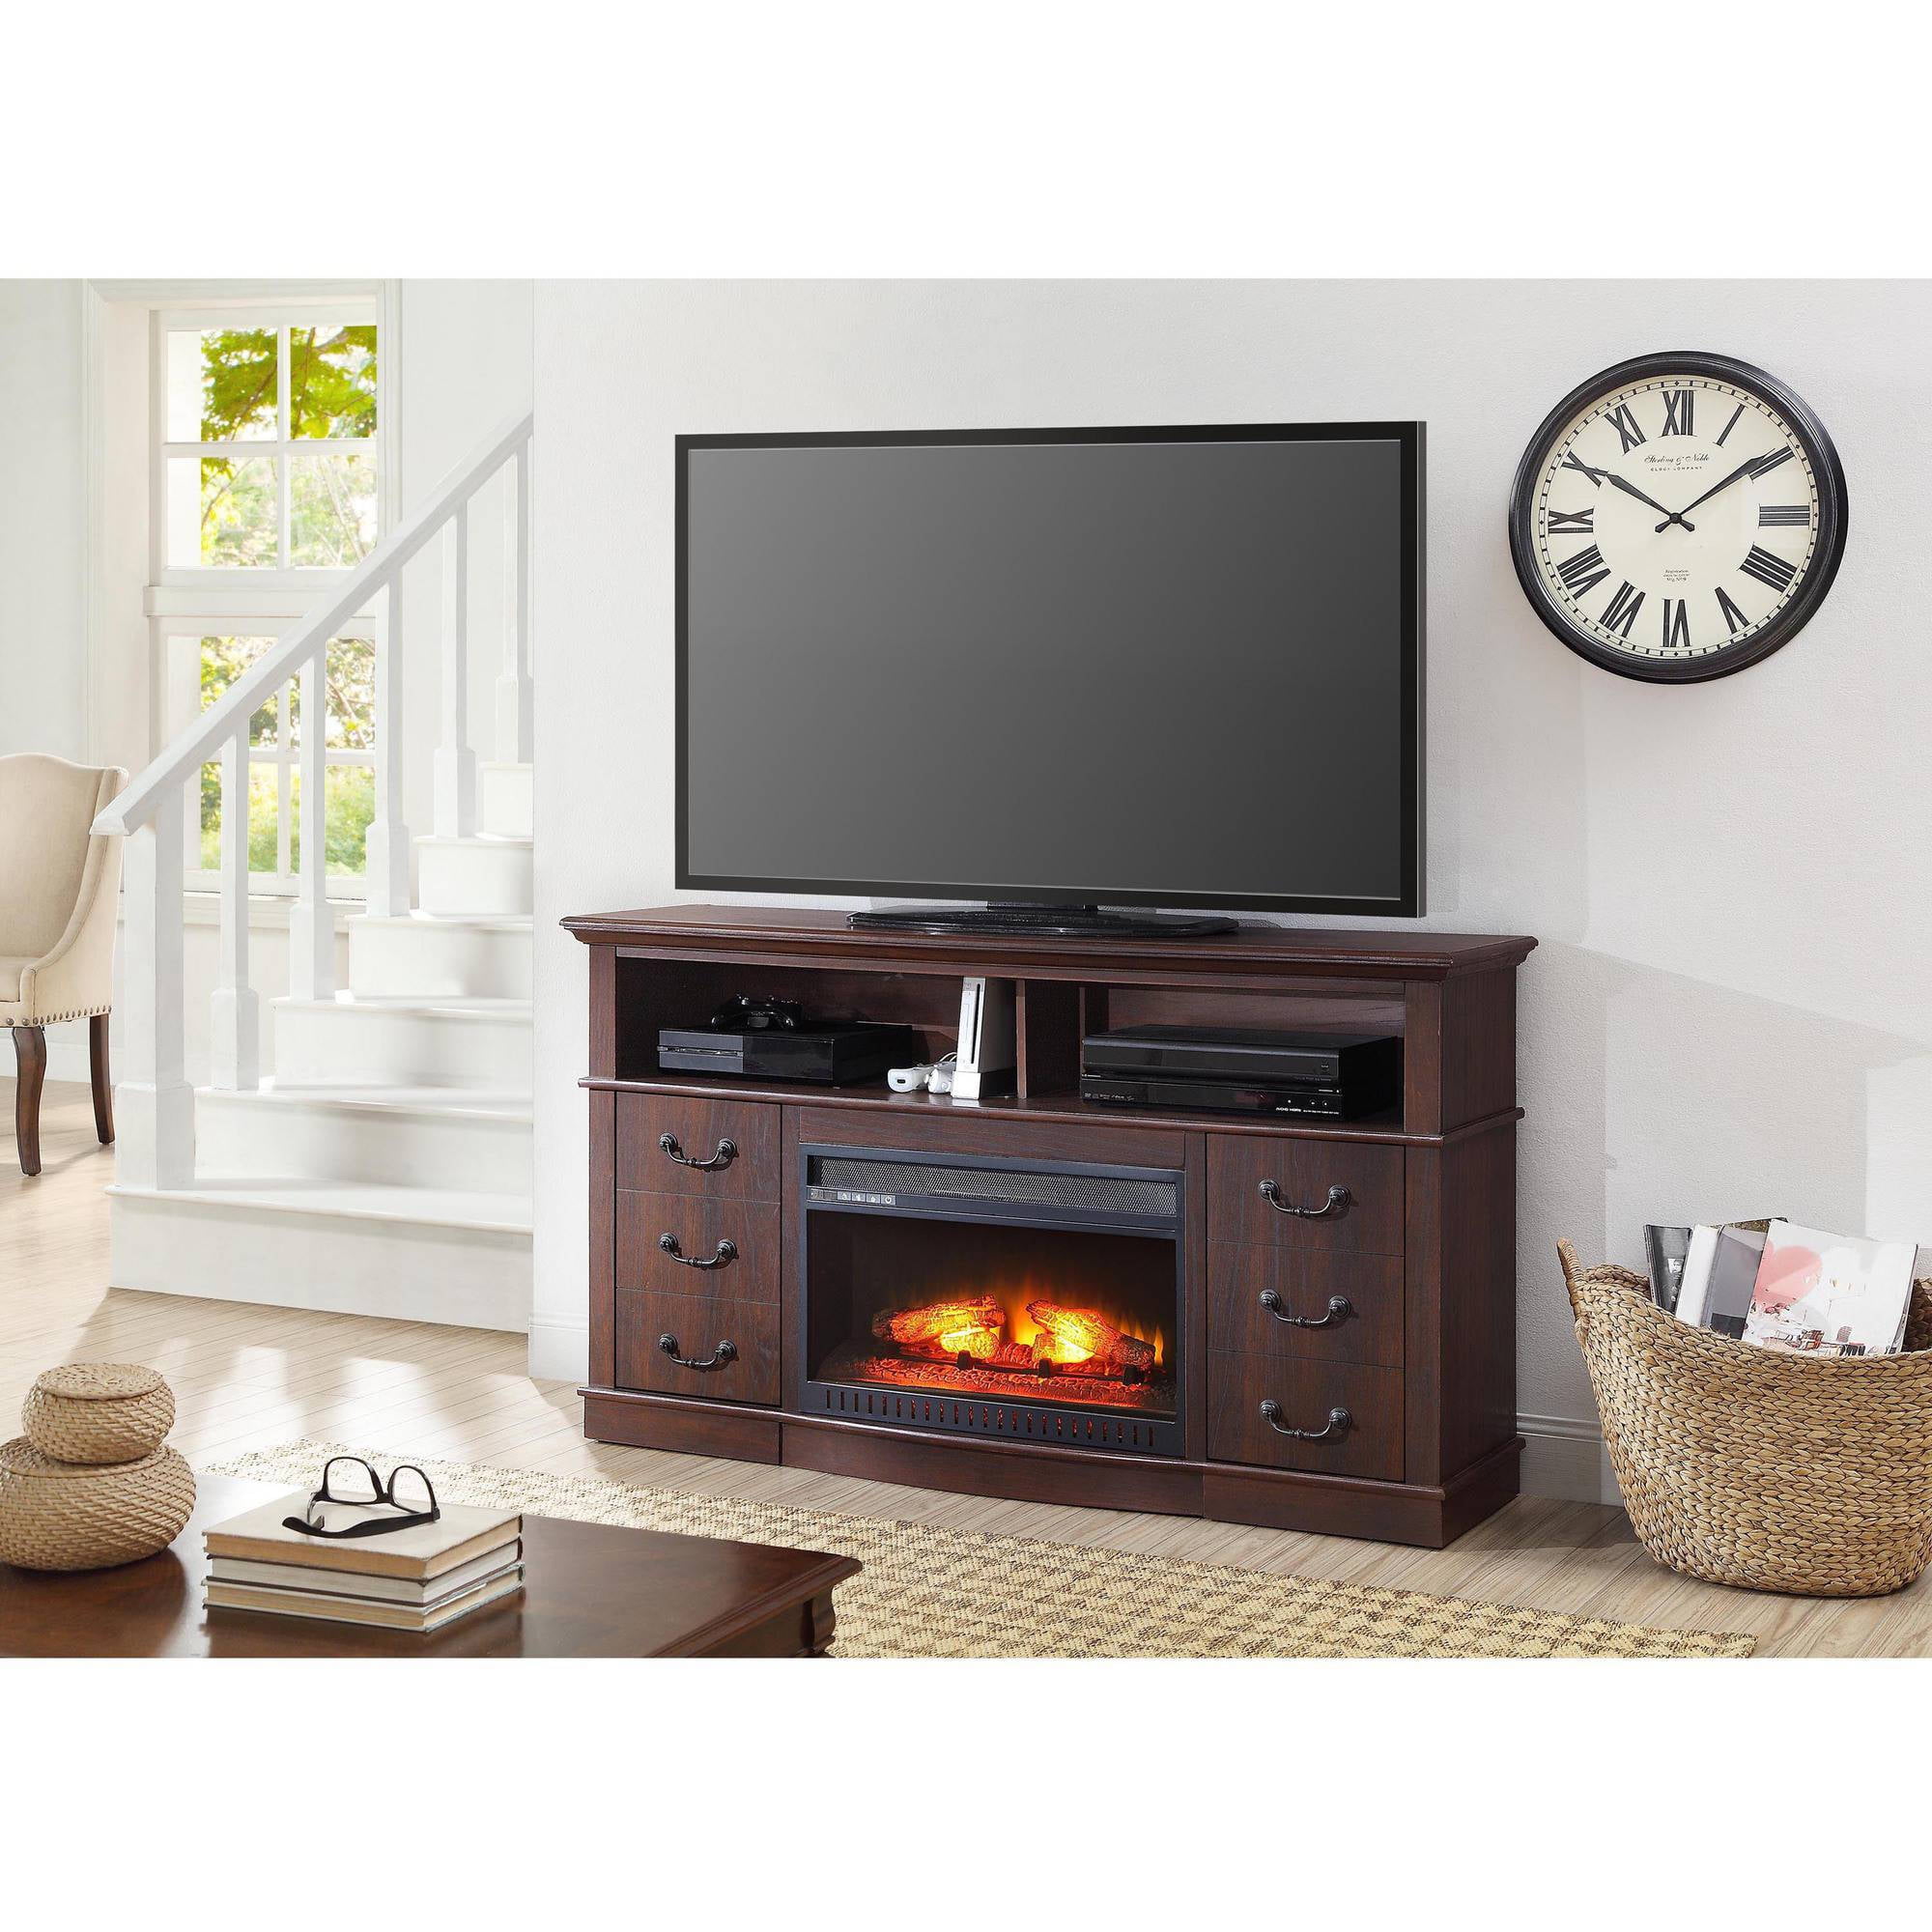 ft Sandinrayli 50 inch Electric Fireplace Heater Gray TV Stand 5 Open Shelves Heat up to 400 sq